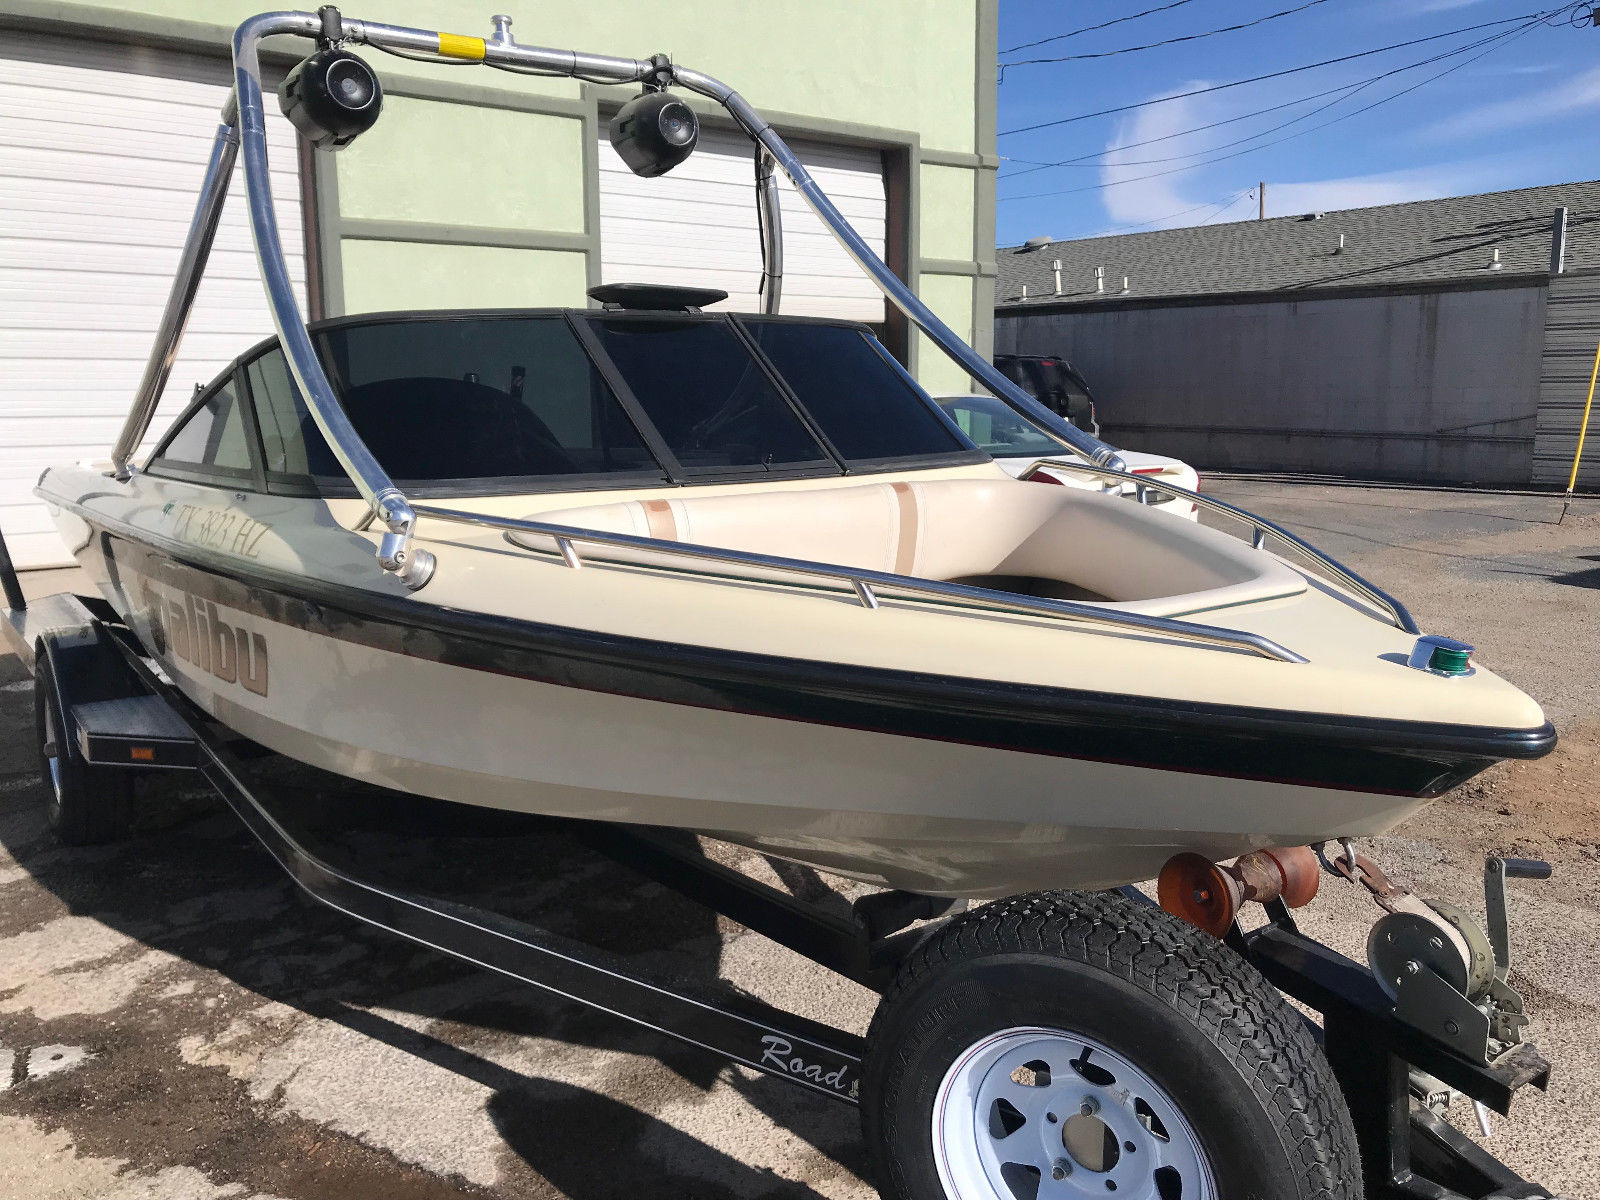 malibu sportster lx 1998 for sale for 12 500 boats from usa com malibu sportster lx 1998 for sale for